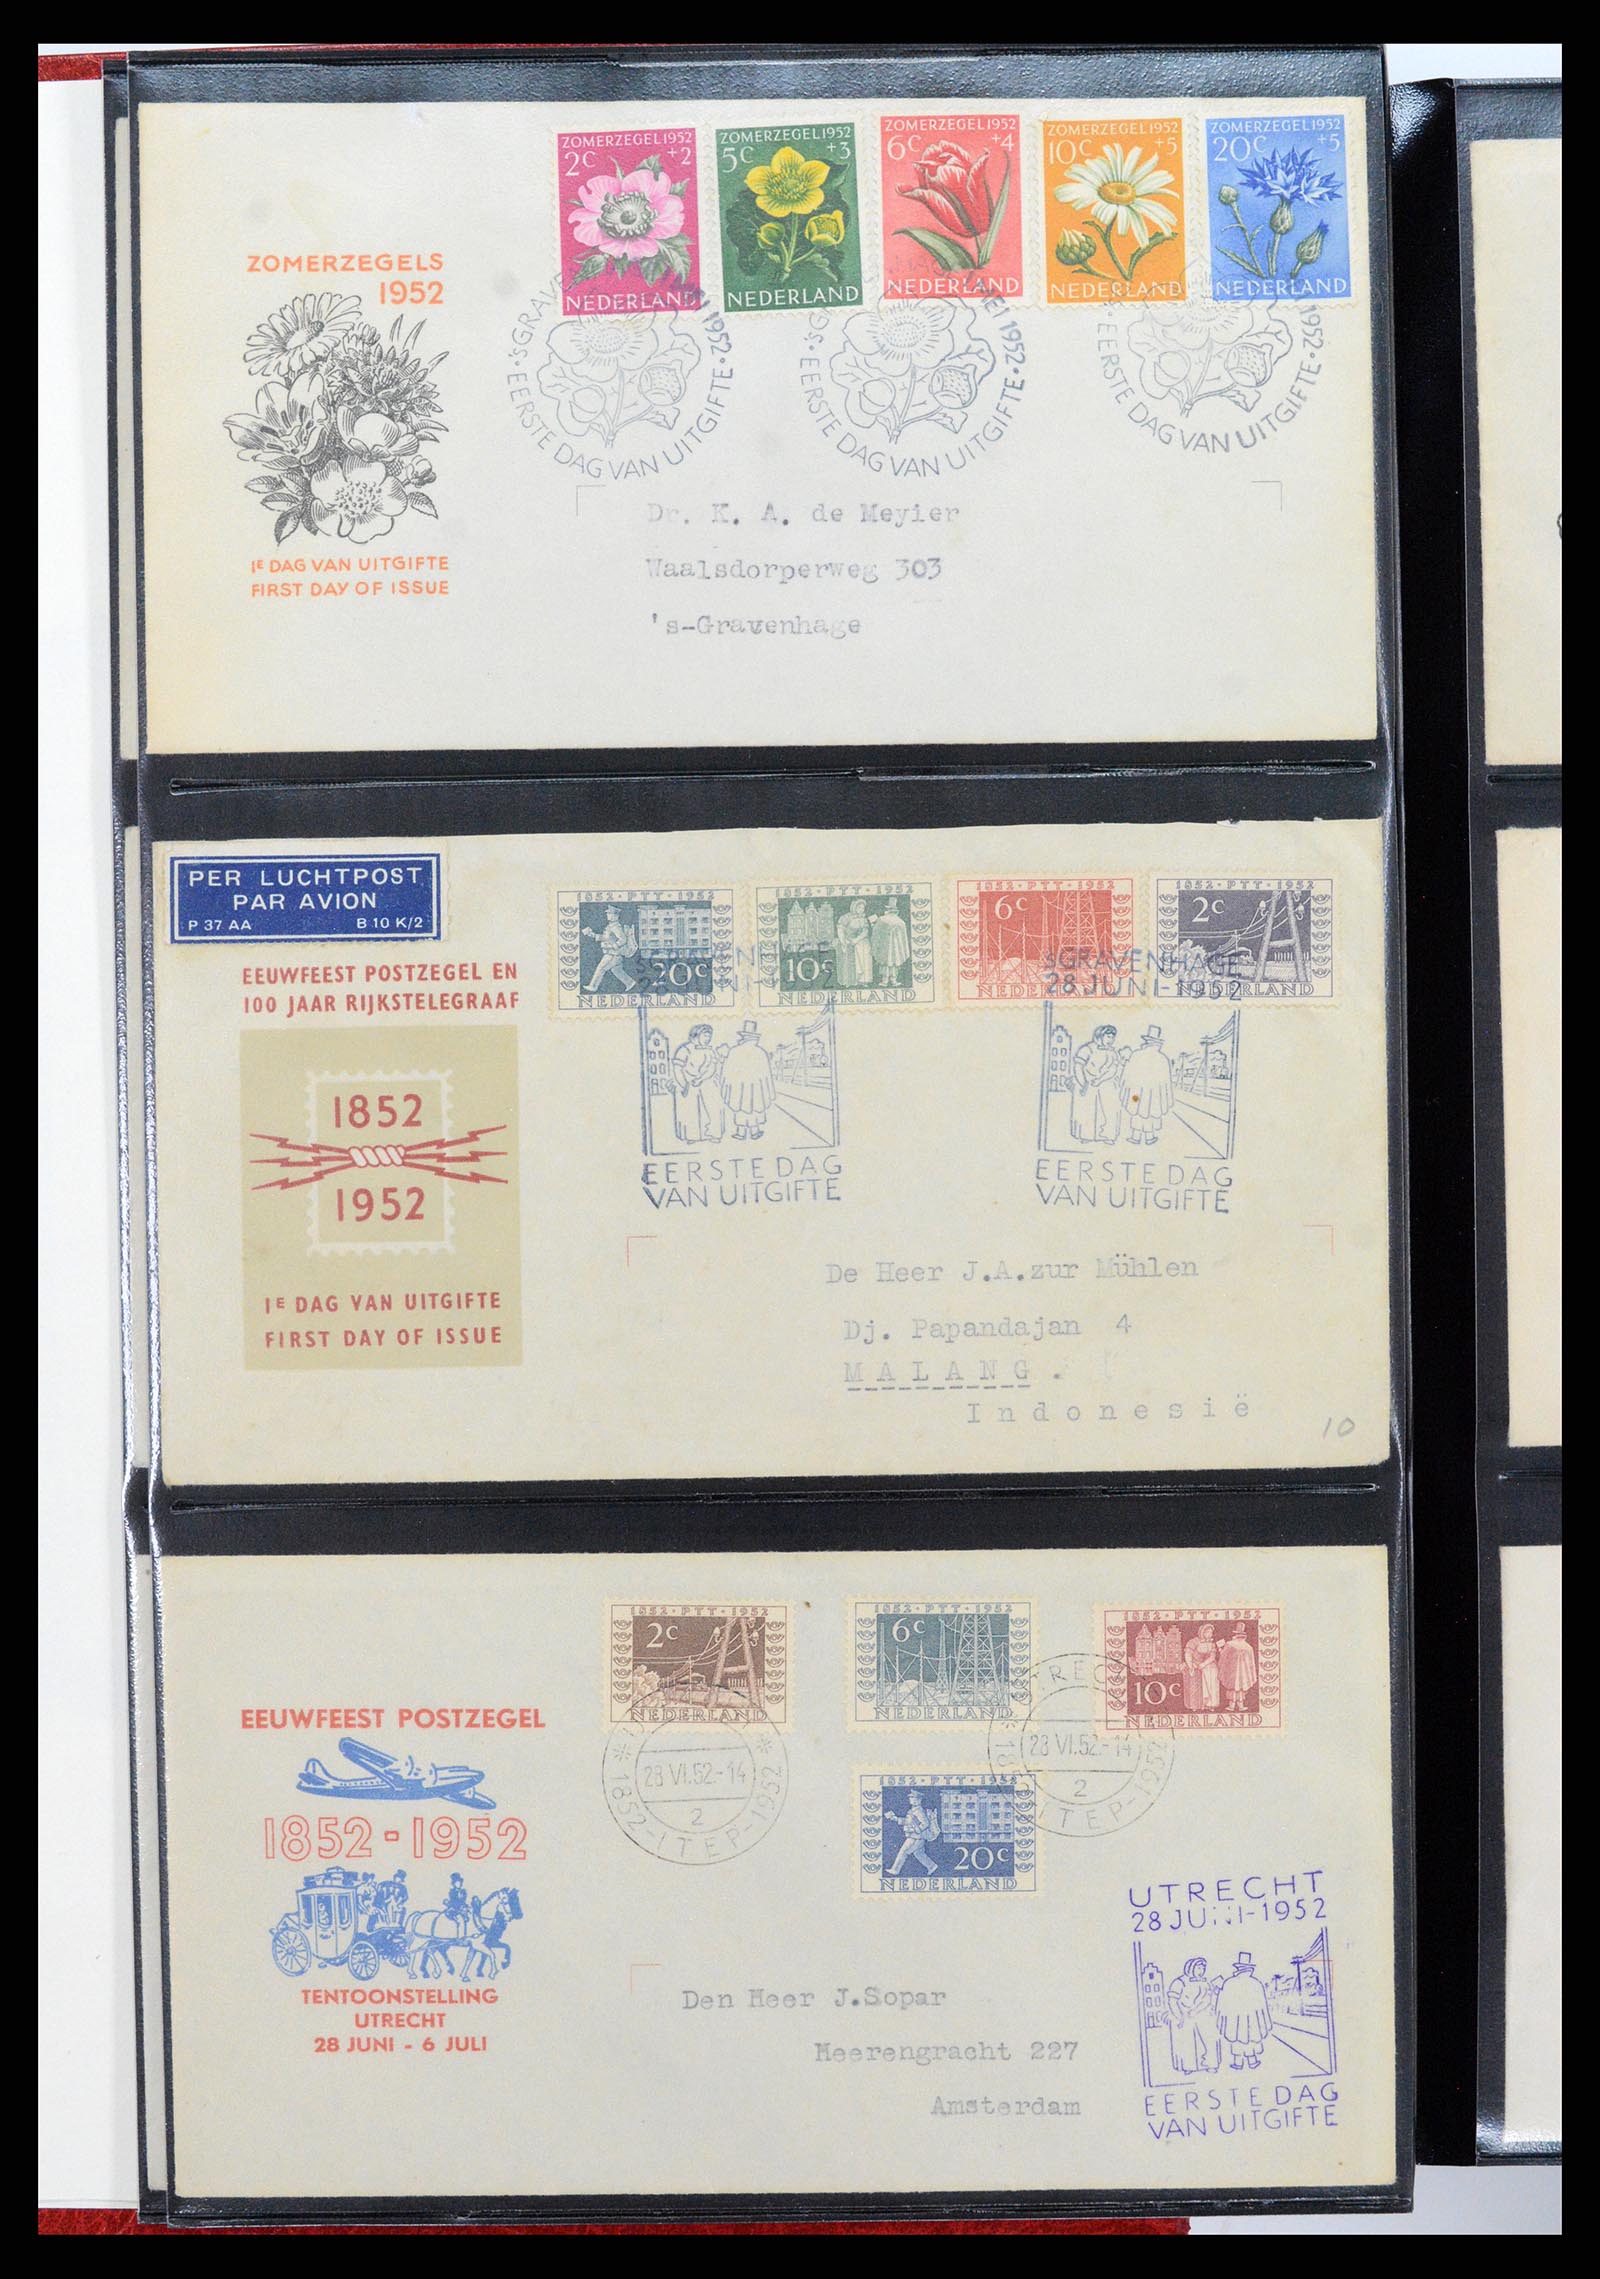 37484 005 - Stamp collection 37484 Netherlands FDC's 1950-1976.